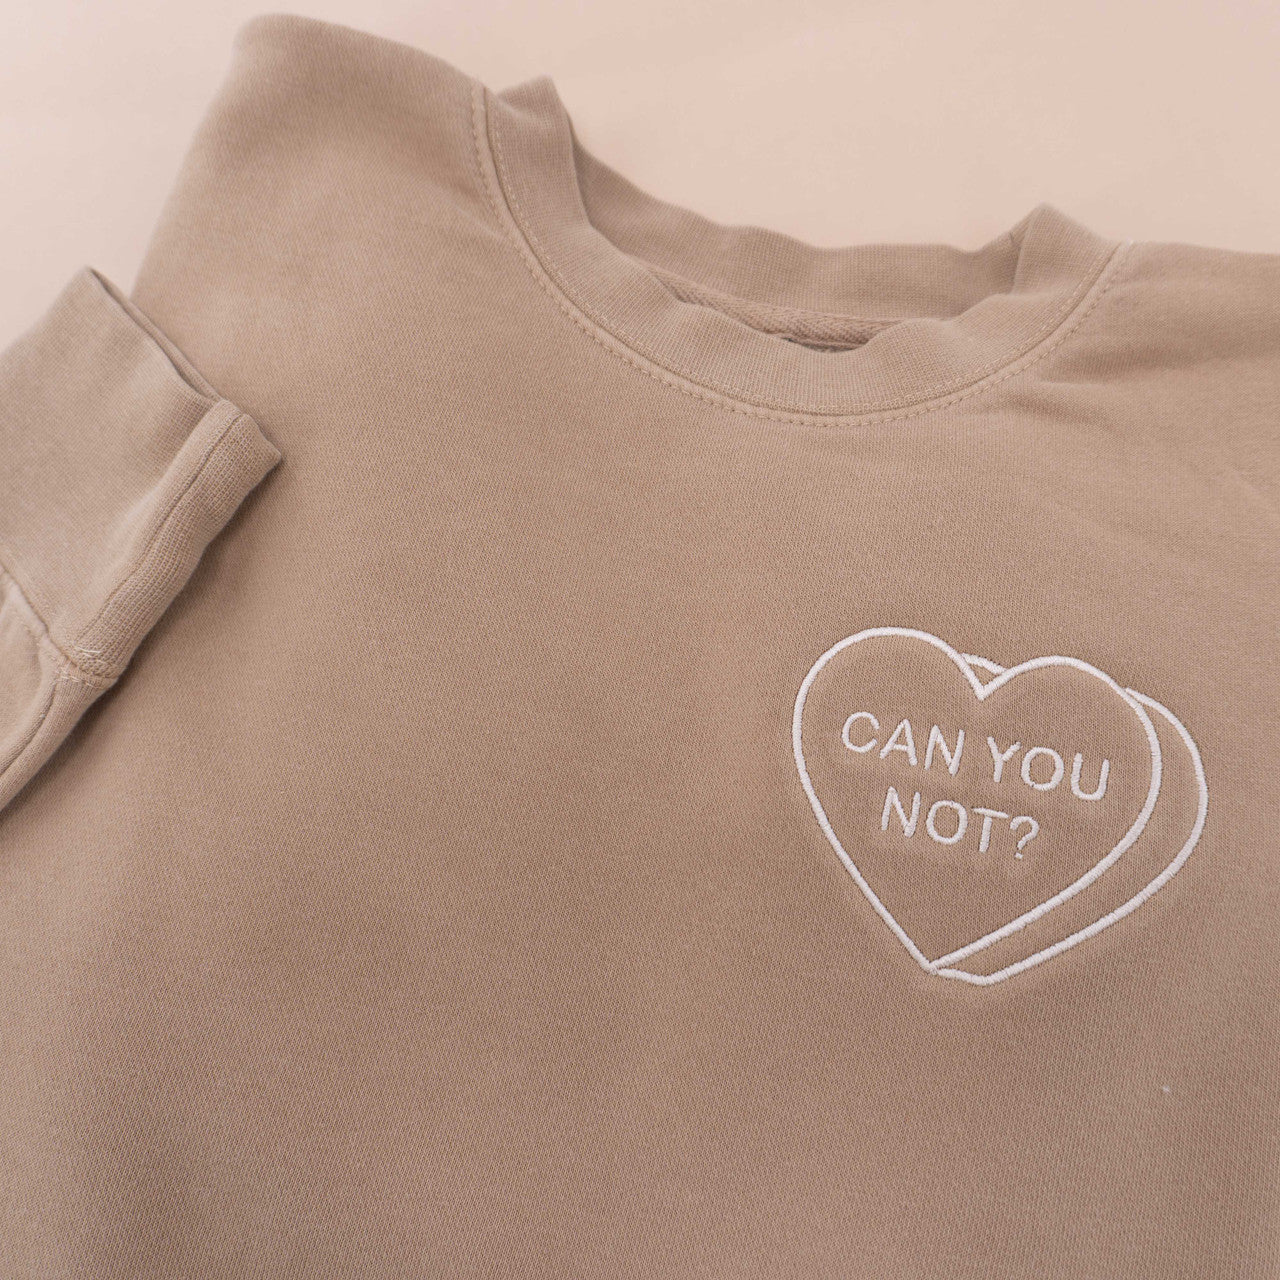 Can You Not? - Embroidered Sweatshirt (Tan)